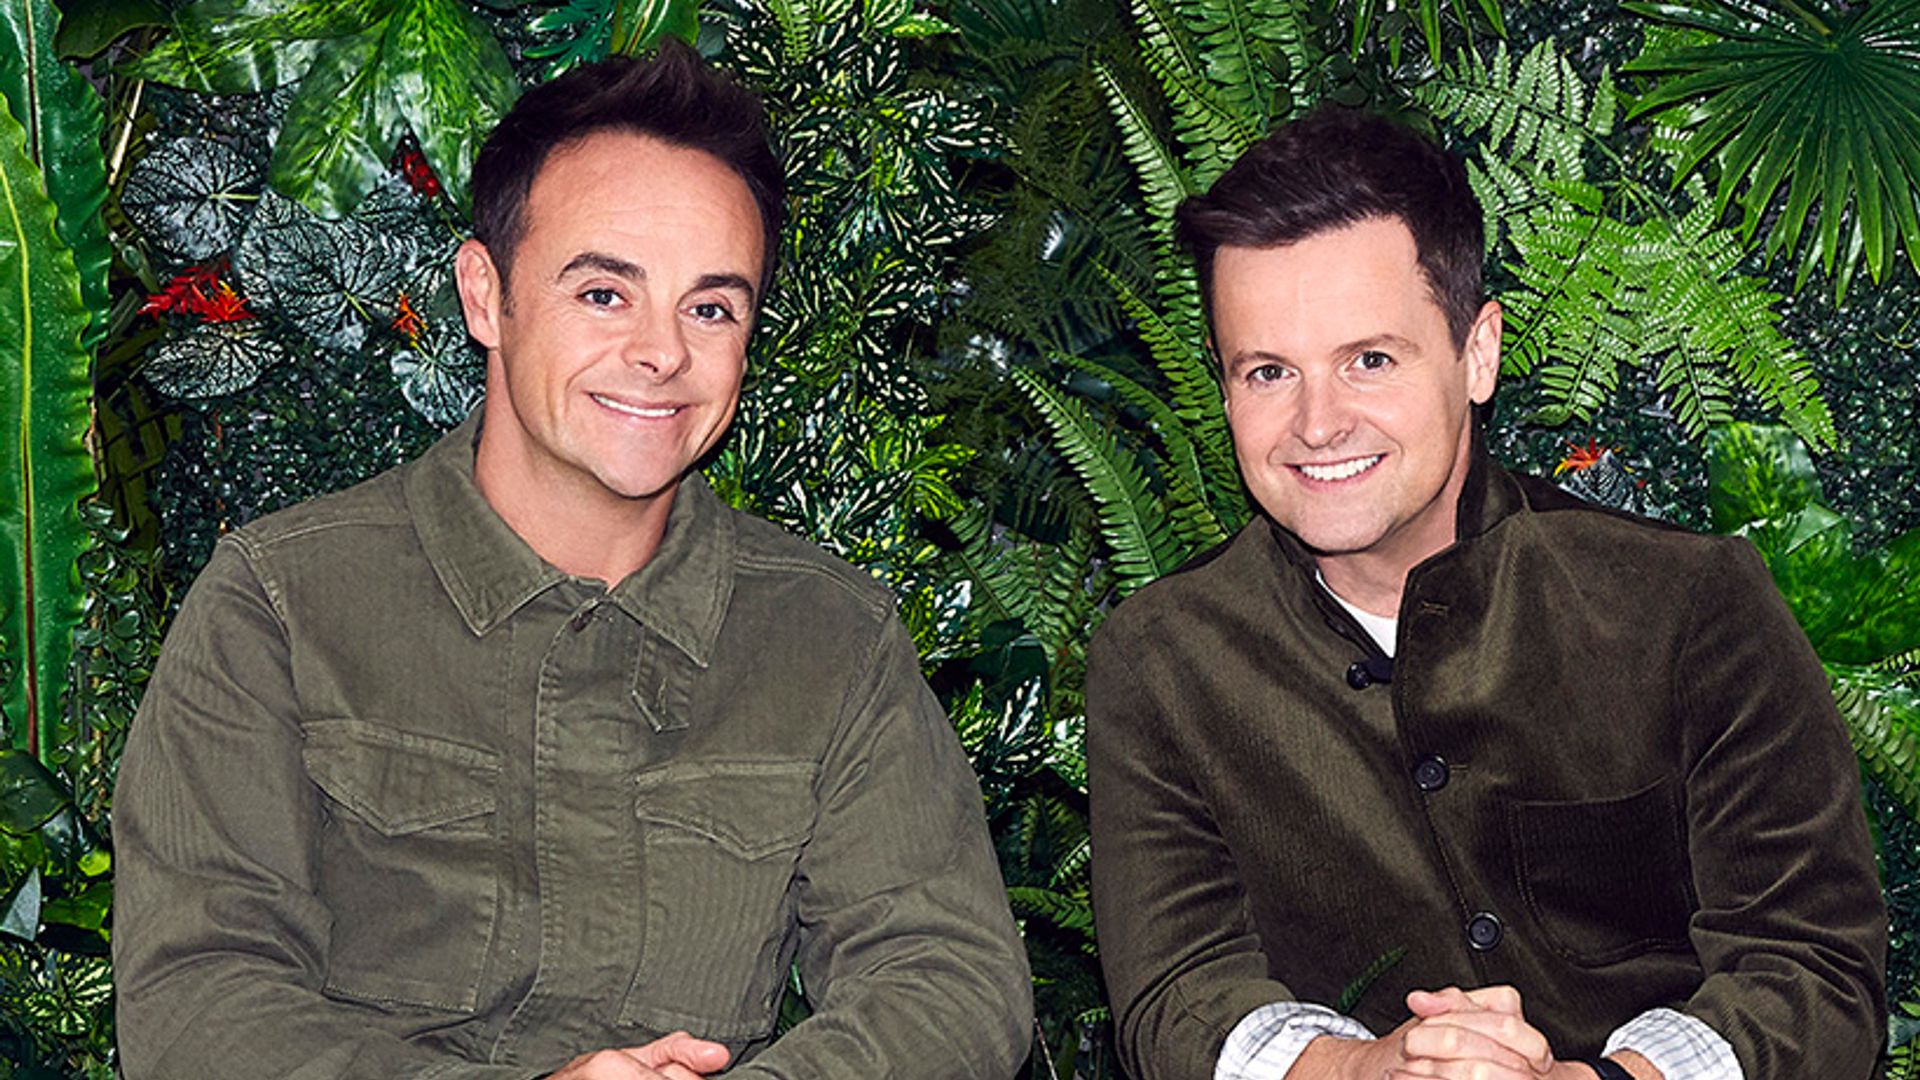 I'm a Celebrity's Declan Donnelly reveals his daughter Isla is behind his arm injury